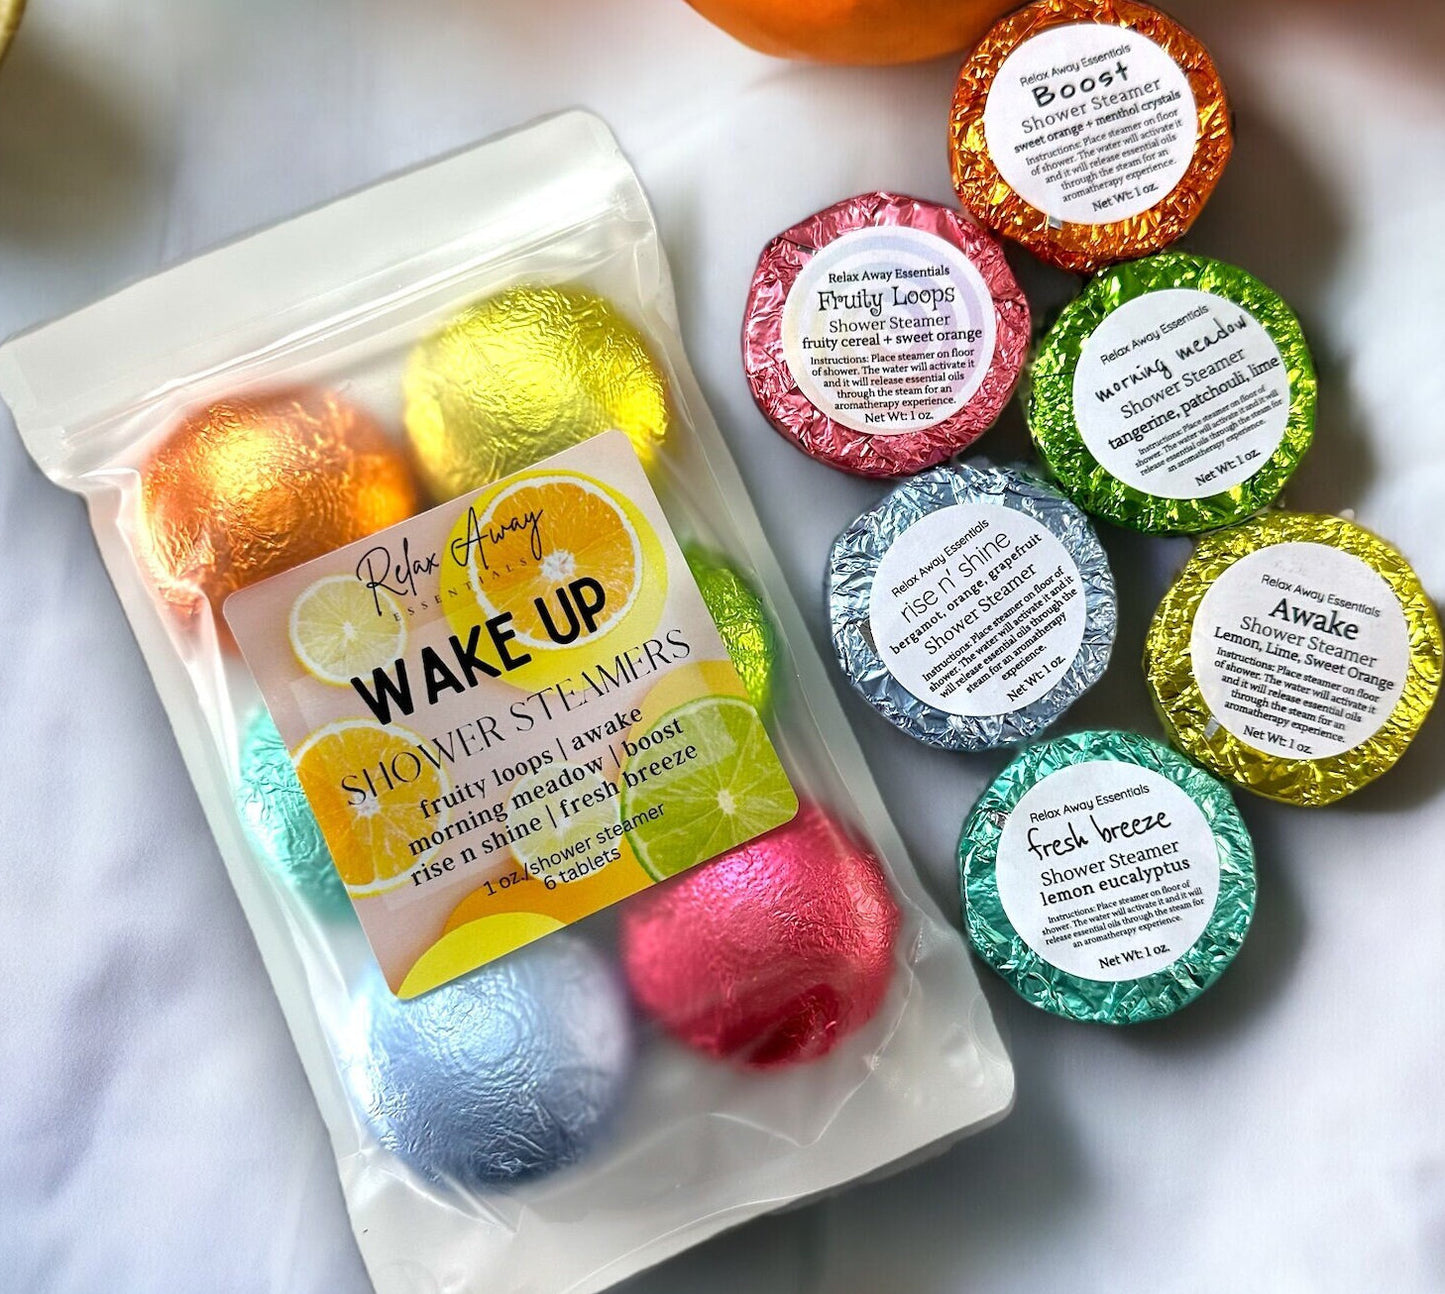 Wake Up Shower Steamers | Variety 6 Pack | Morning Shower Steamers | Spa Gift | Essential Oils | Citrus | Aromatherapy | Gift for her